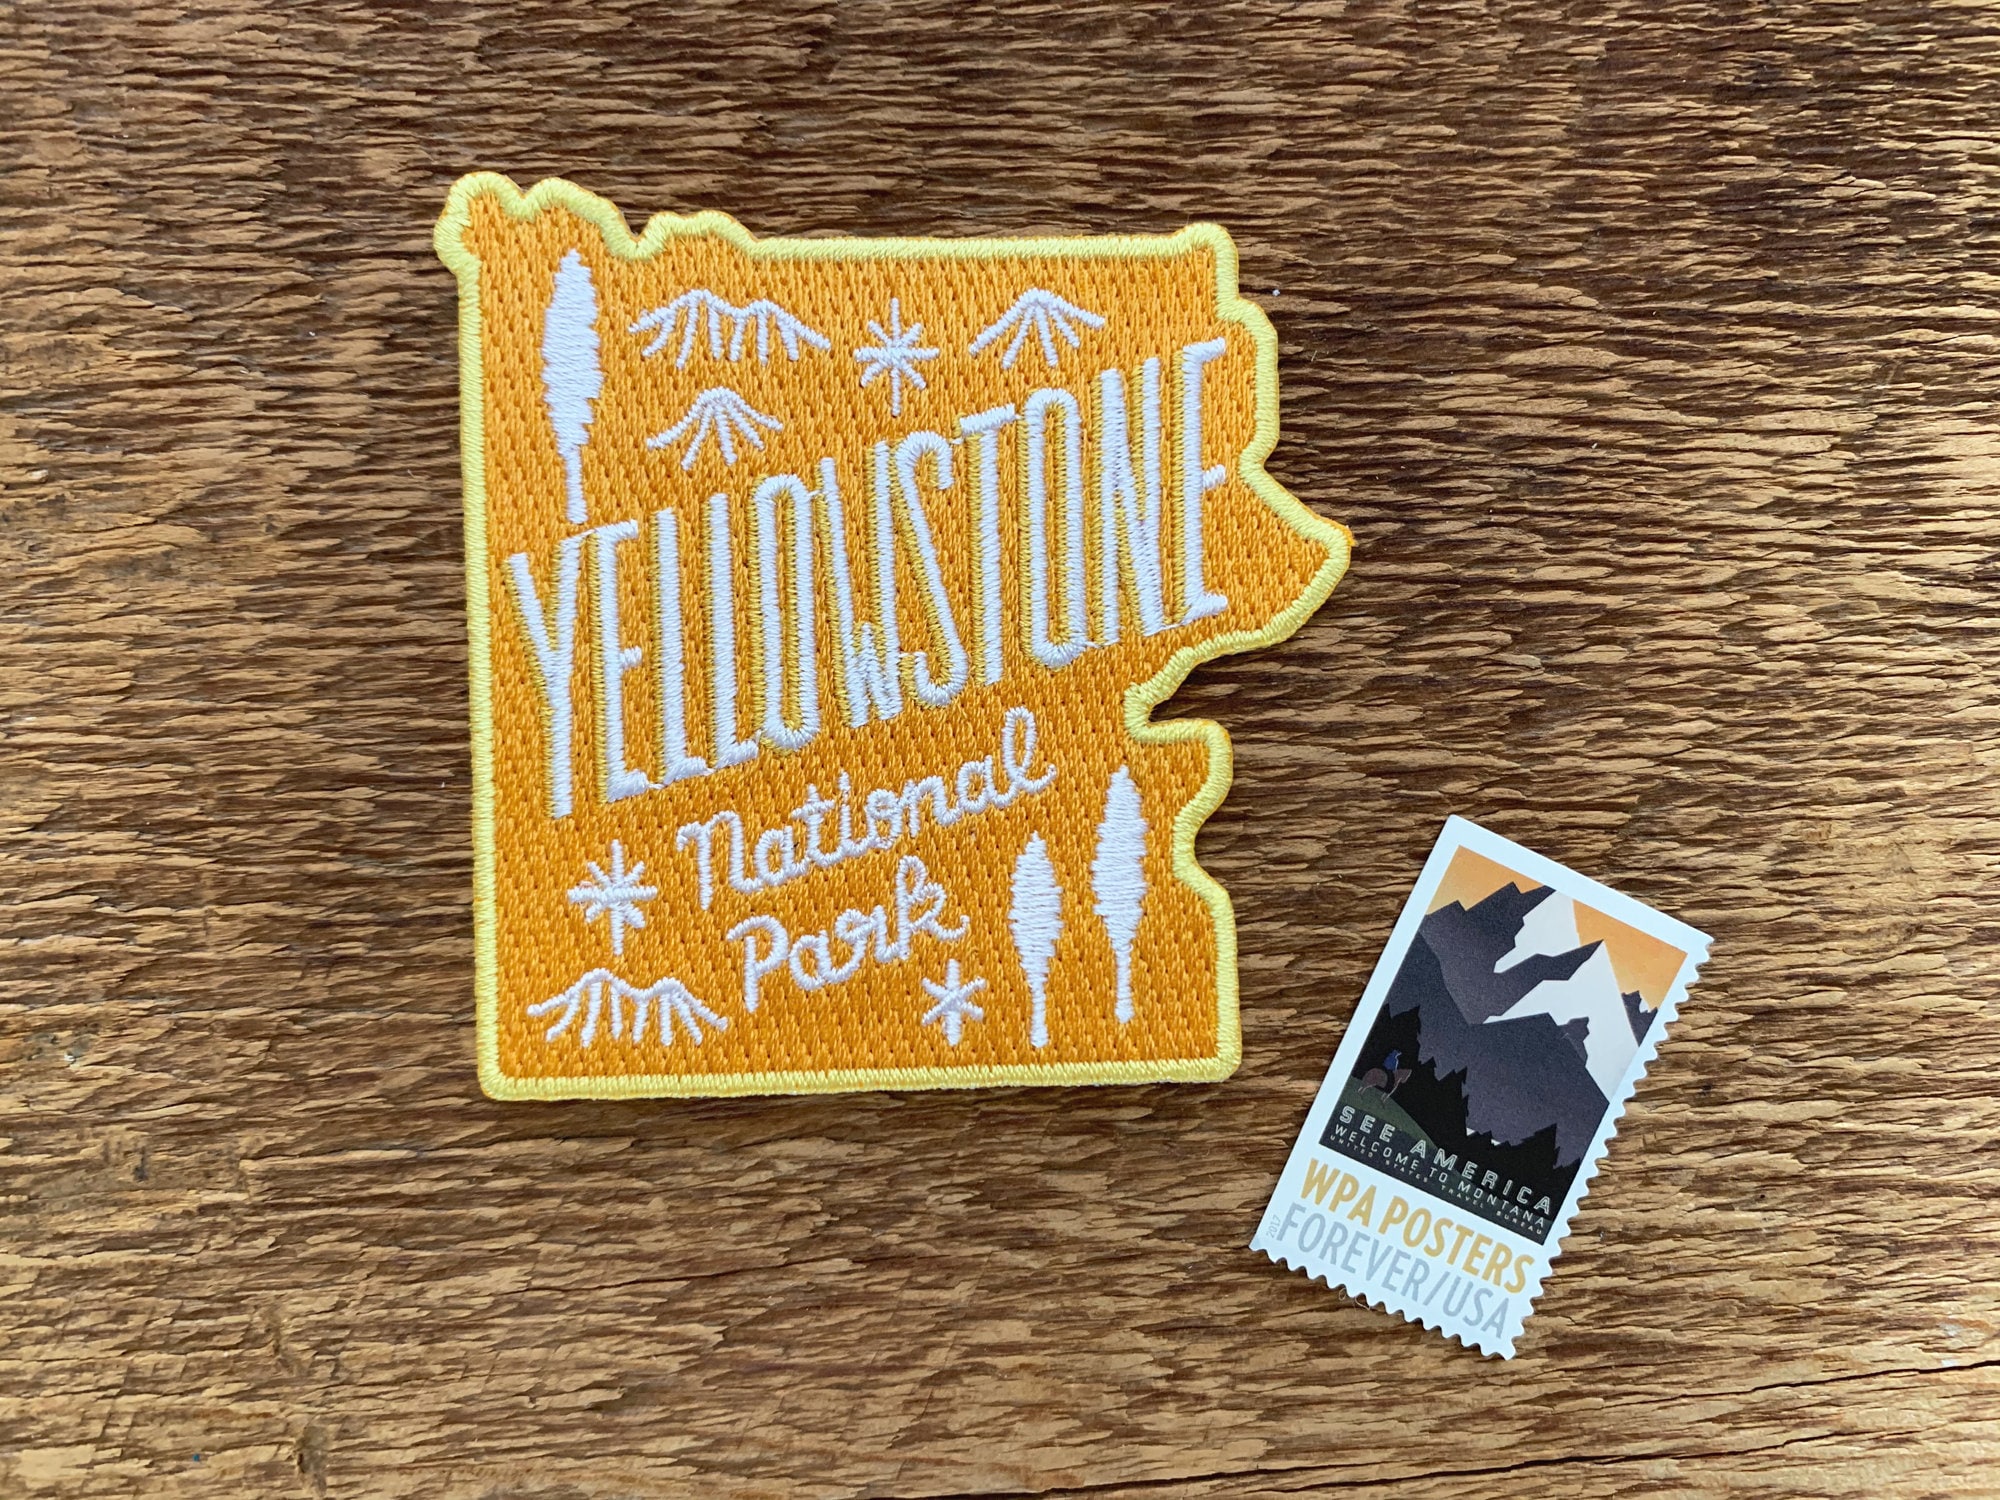 Yellowstone National Park Patch (3.5 Inch) Iron-on Badge USA Travel Pa –  karmapatch.com